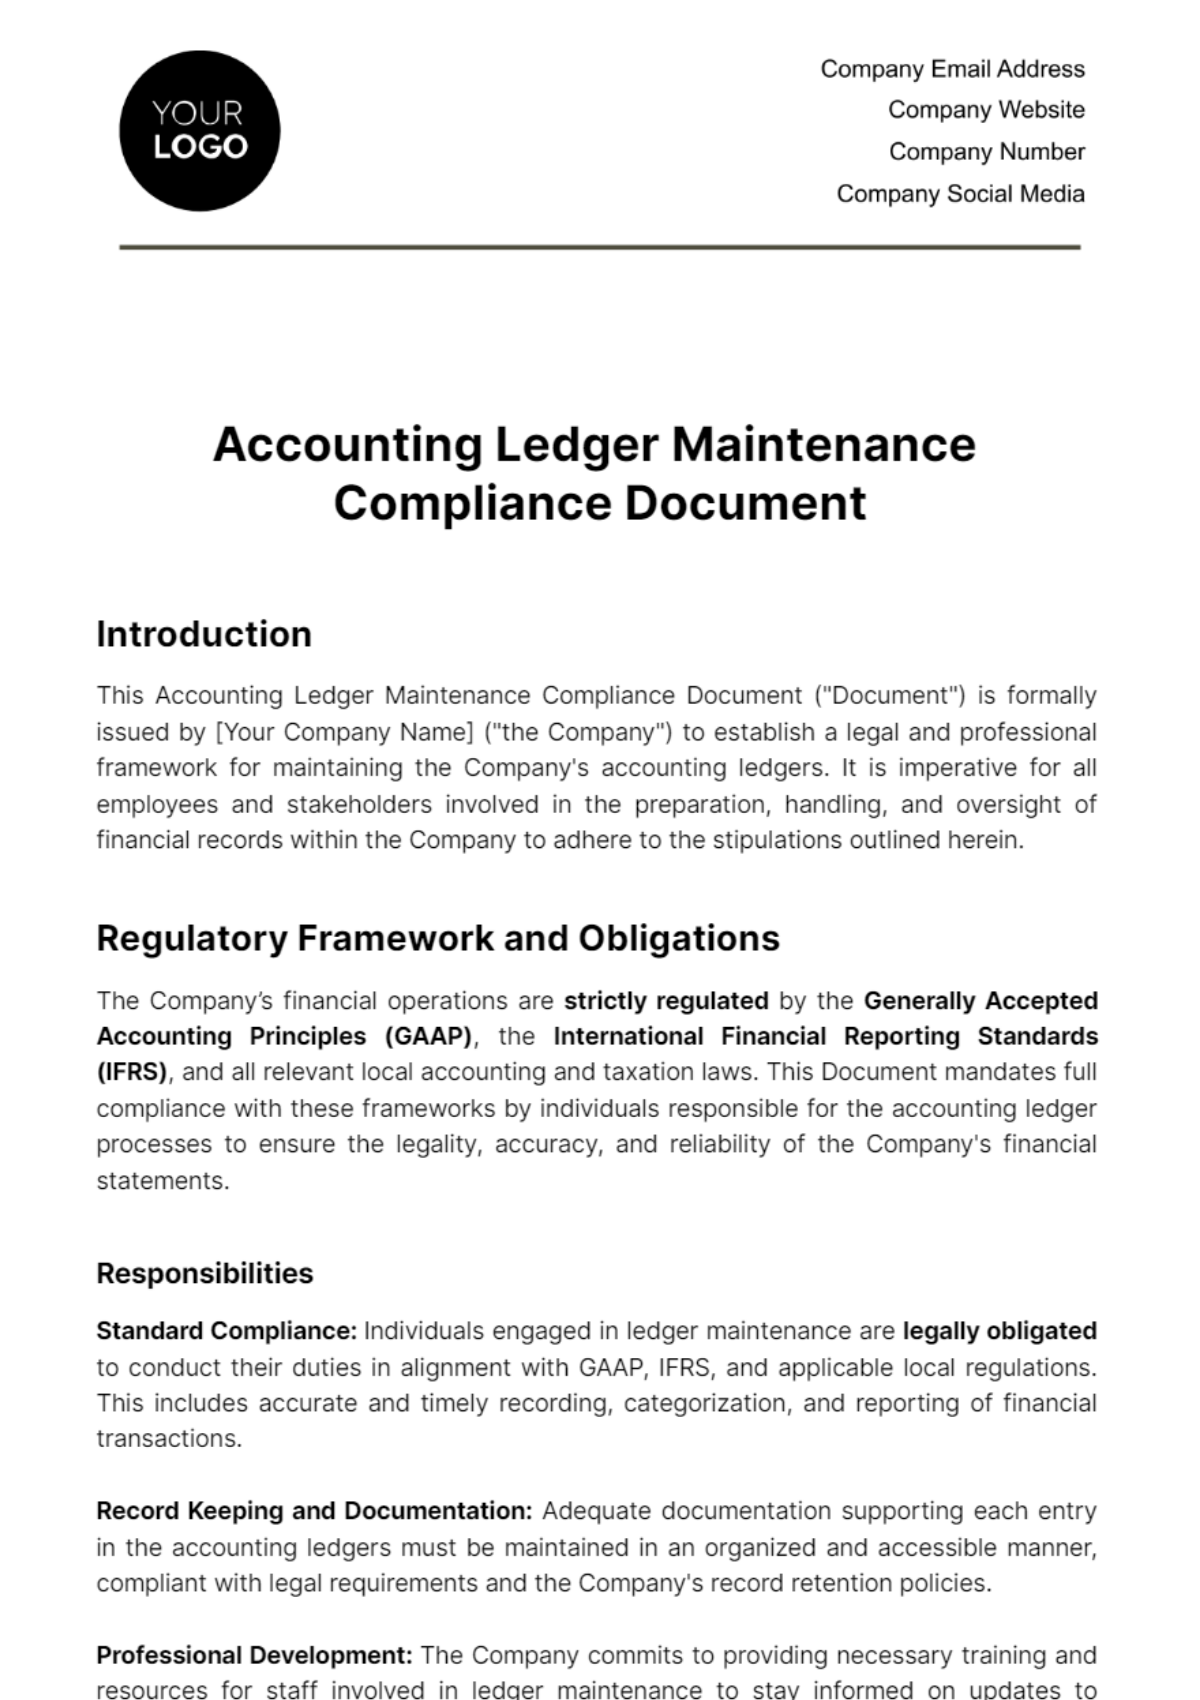 Accounting Ledger Maintenance Compliance Document Template